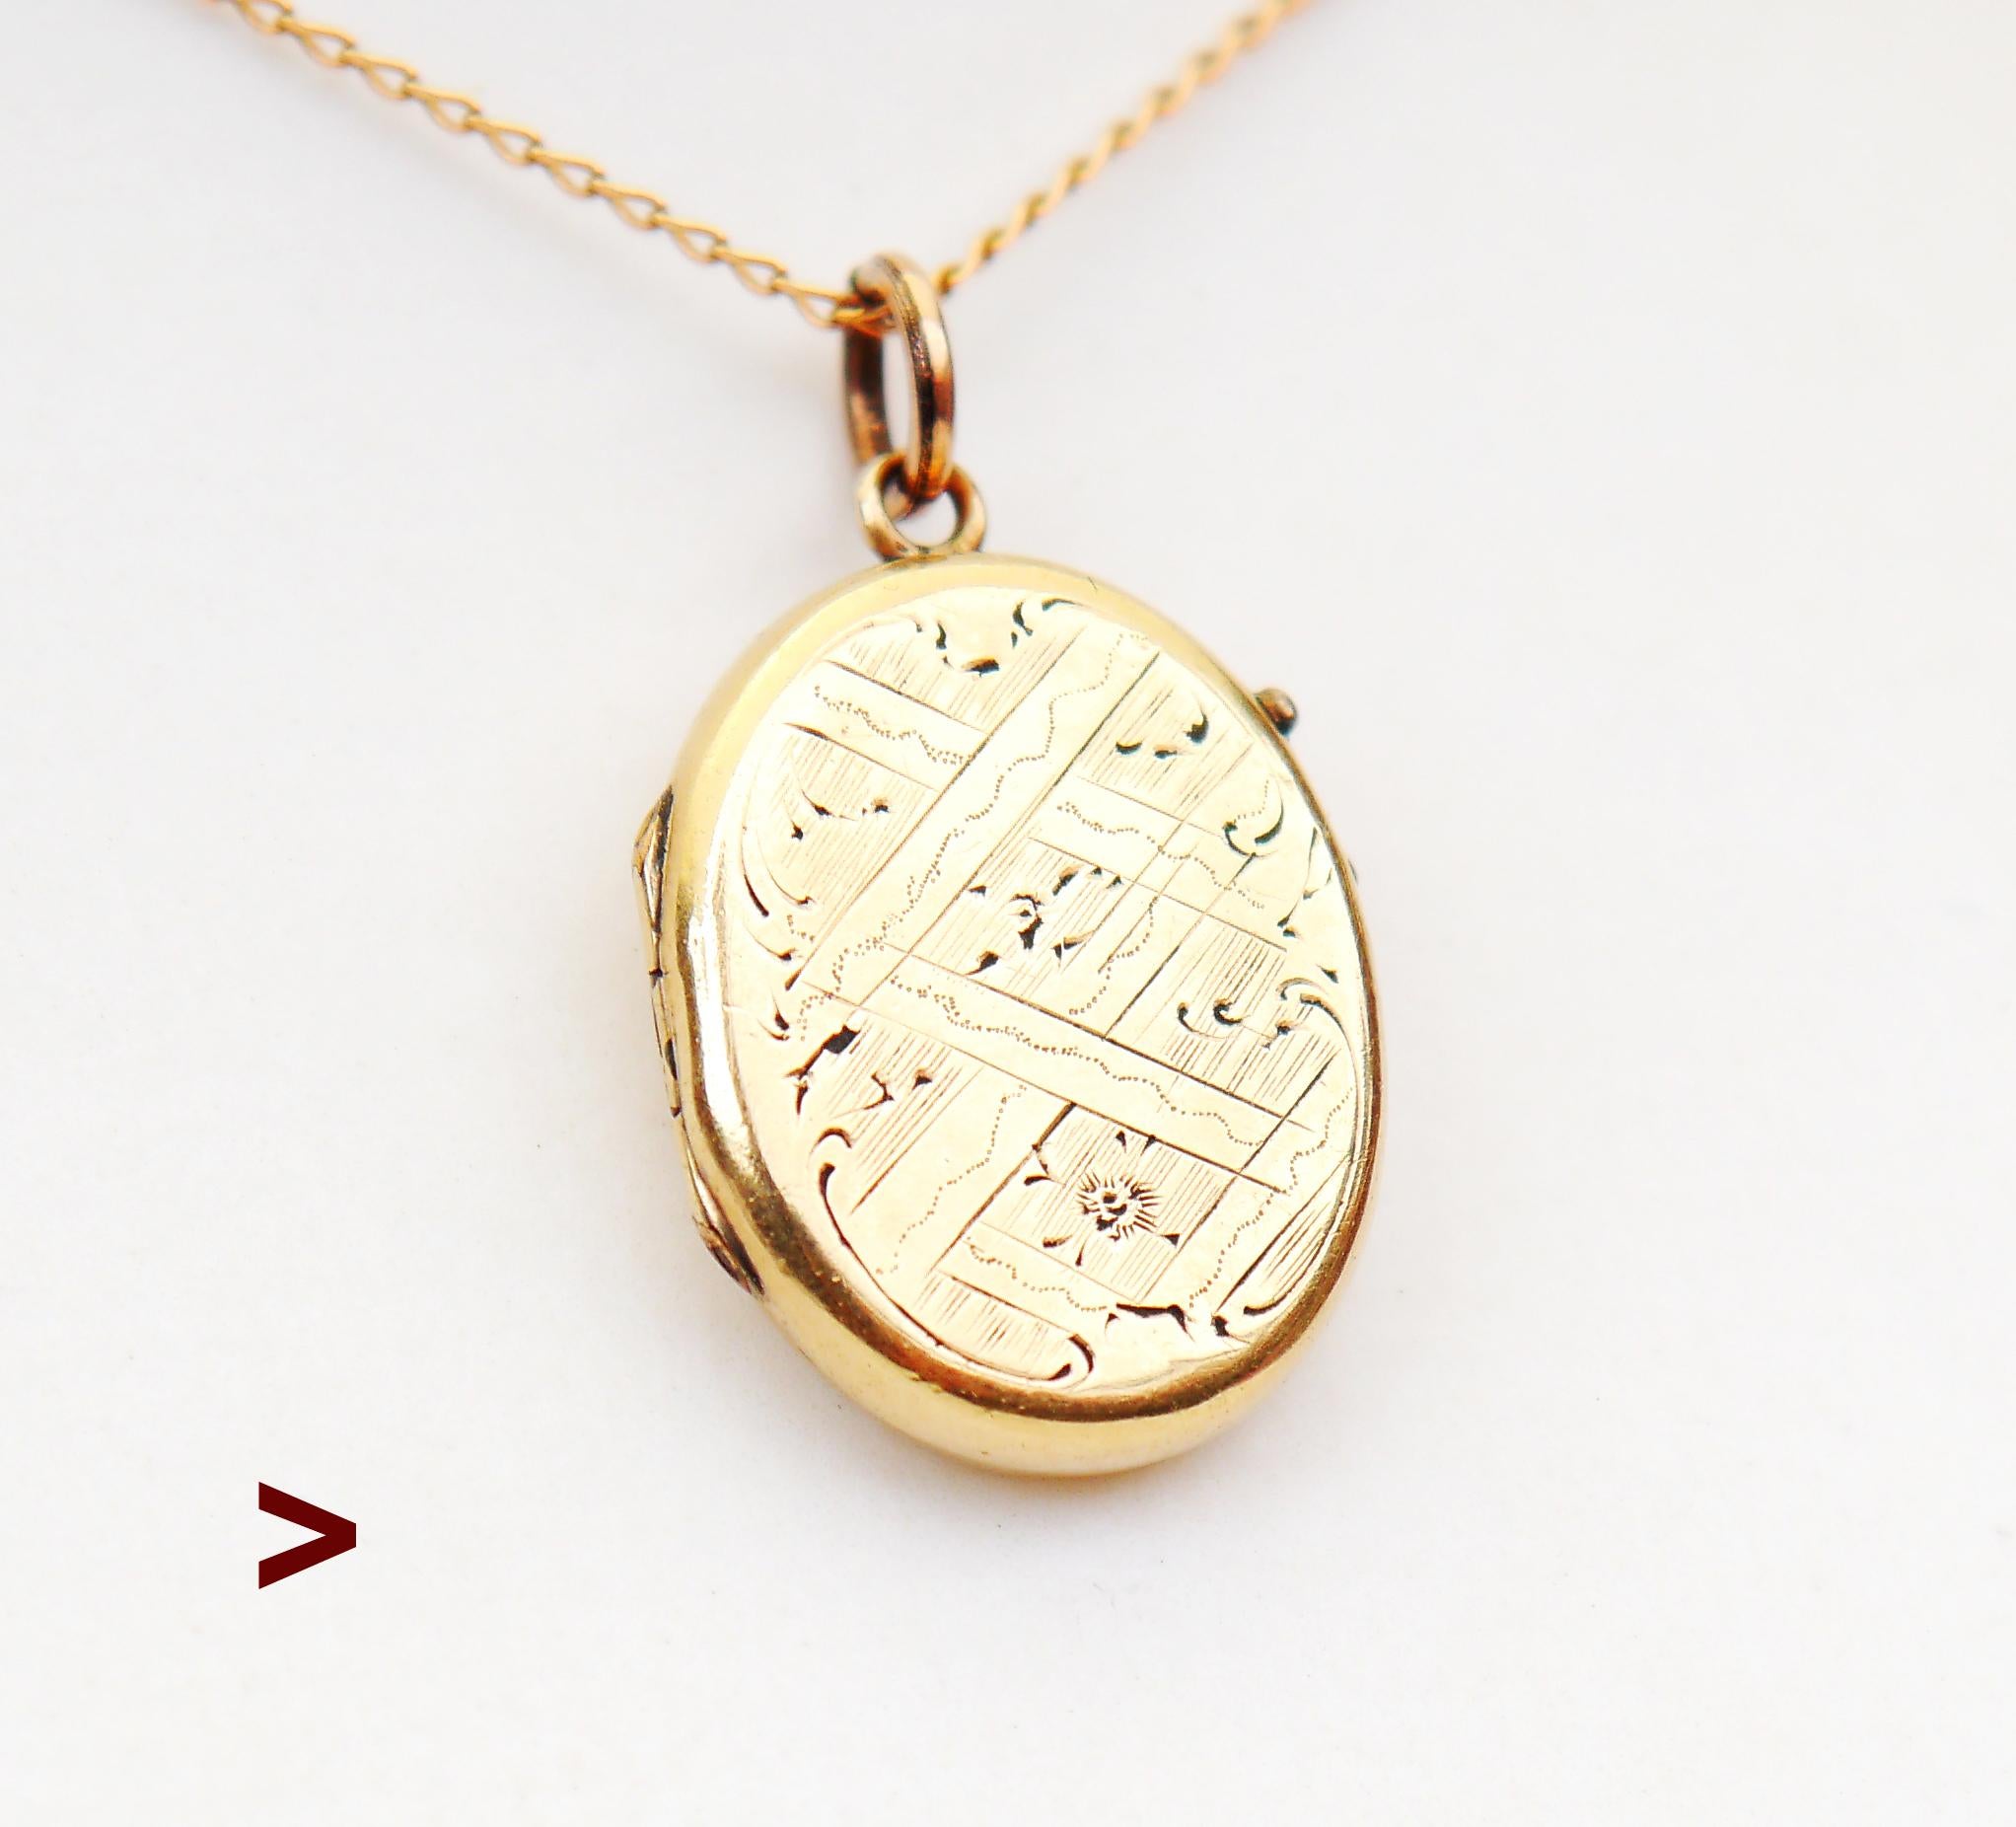 Antique 19th - early XX cent. European Pendant / Locket made of solid 14K Greenish Yellow Gold.

Delicate engravings of miniature proportions on both sides.Inside - golden bezel with glass plate.

Hallmarked, originates from Austria, likely made on